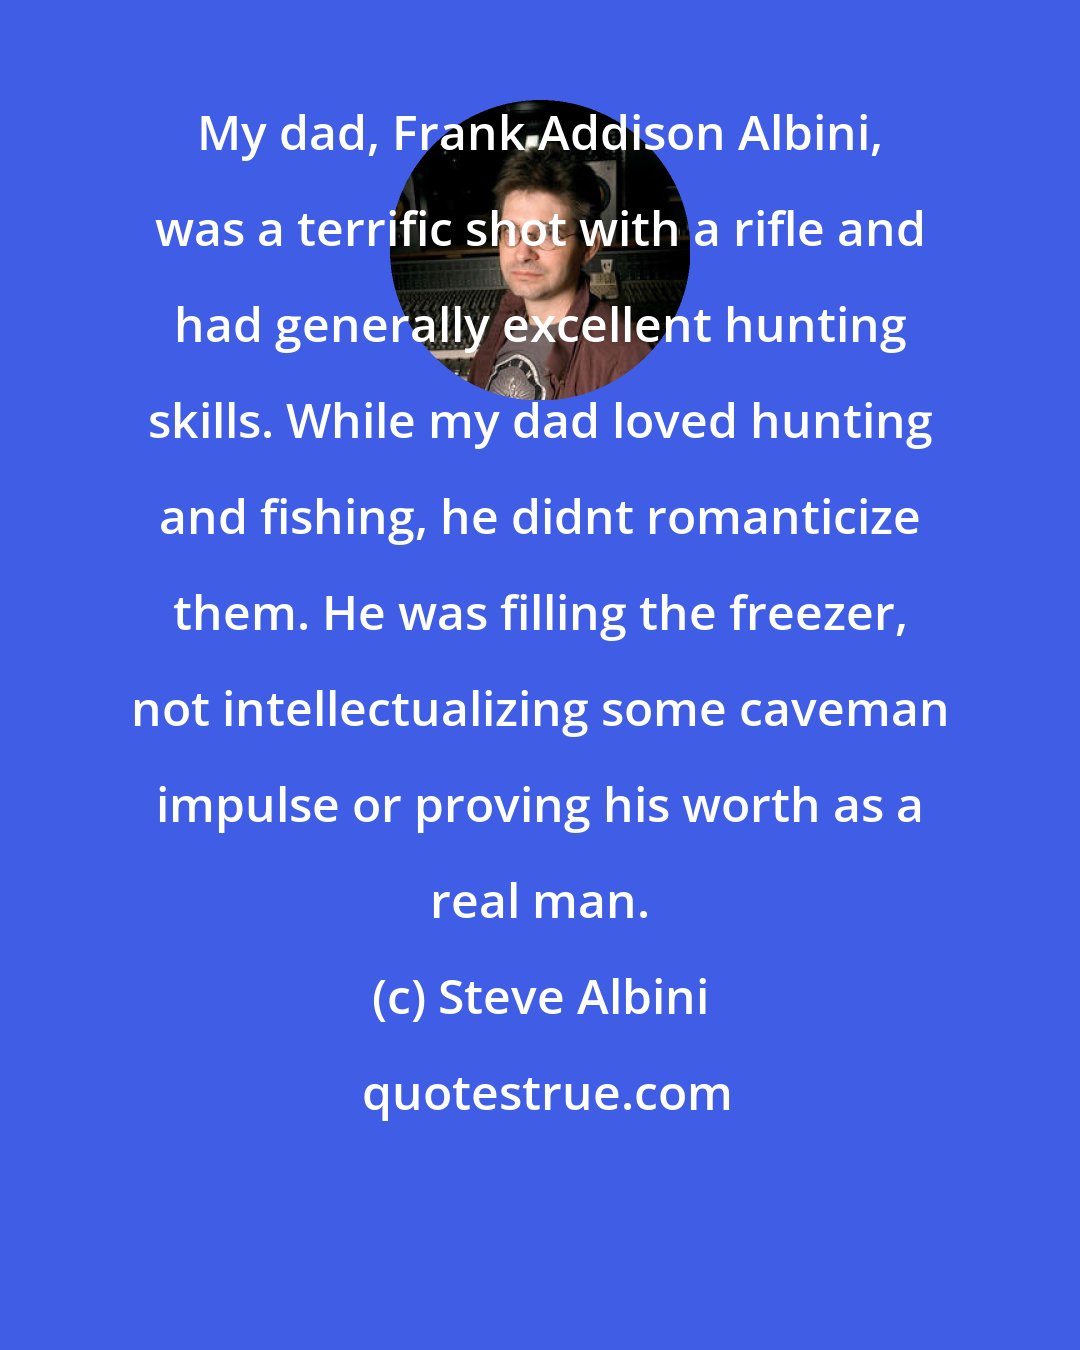 Steve Albini: My dad, Frank Addison Albini, was a terrific shot with a rifle and had generally excellent hunting skills. While my dad loved hunting and fishing, he didnt romanticize them. He was filling the freezer, not intellectualizing some caveman impulse or proving his worth as a real man.